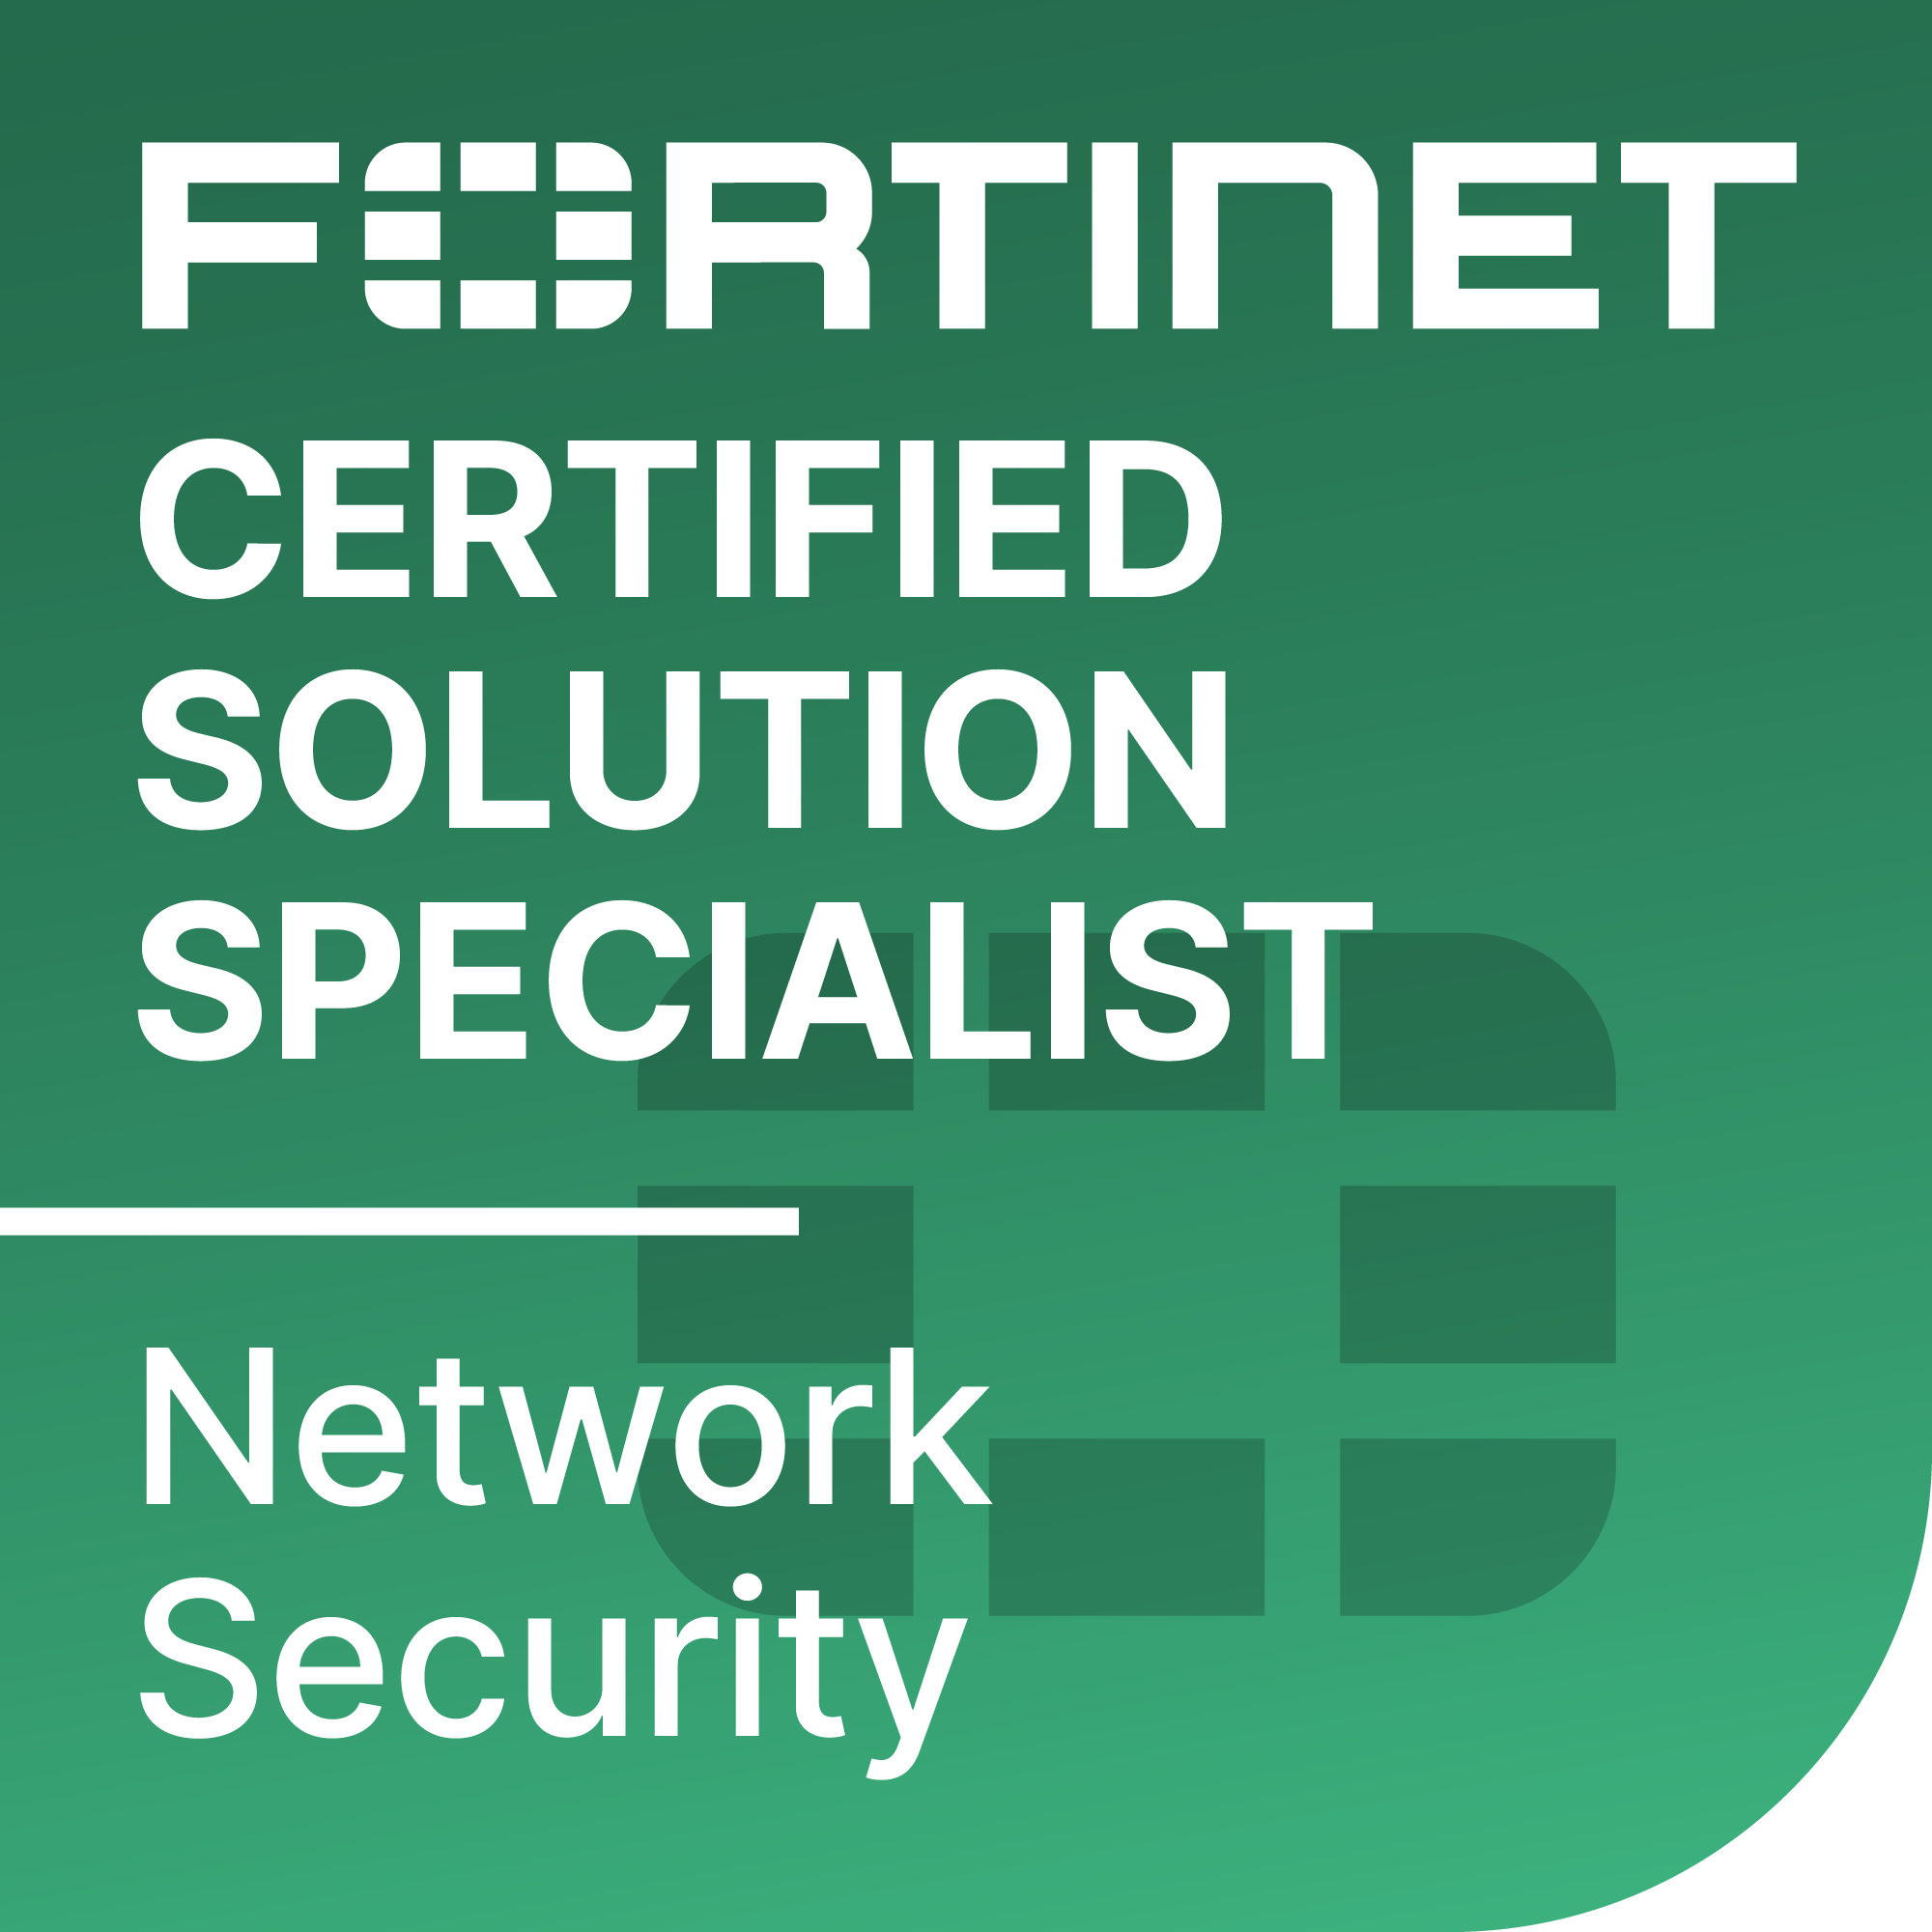 Fortinet Certified Solution Specialist Network Security badge